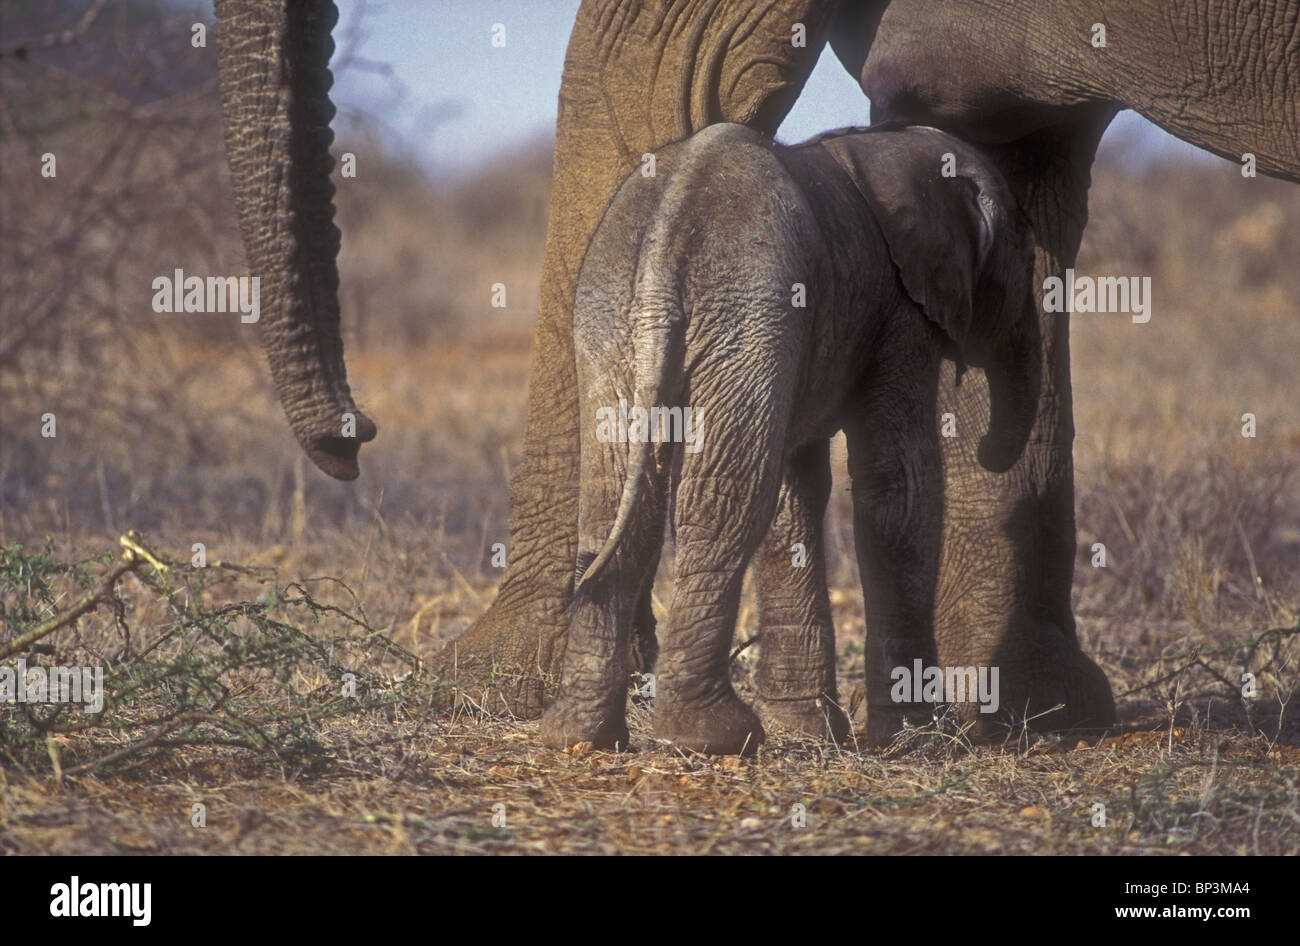 New born baby elephant calf only a few hours old standing close to mother Samburu National Reserve Kenya East Africa Stock Photo